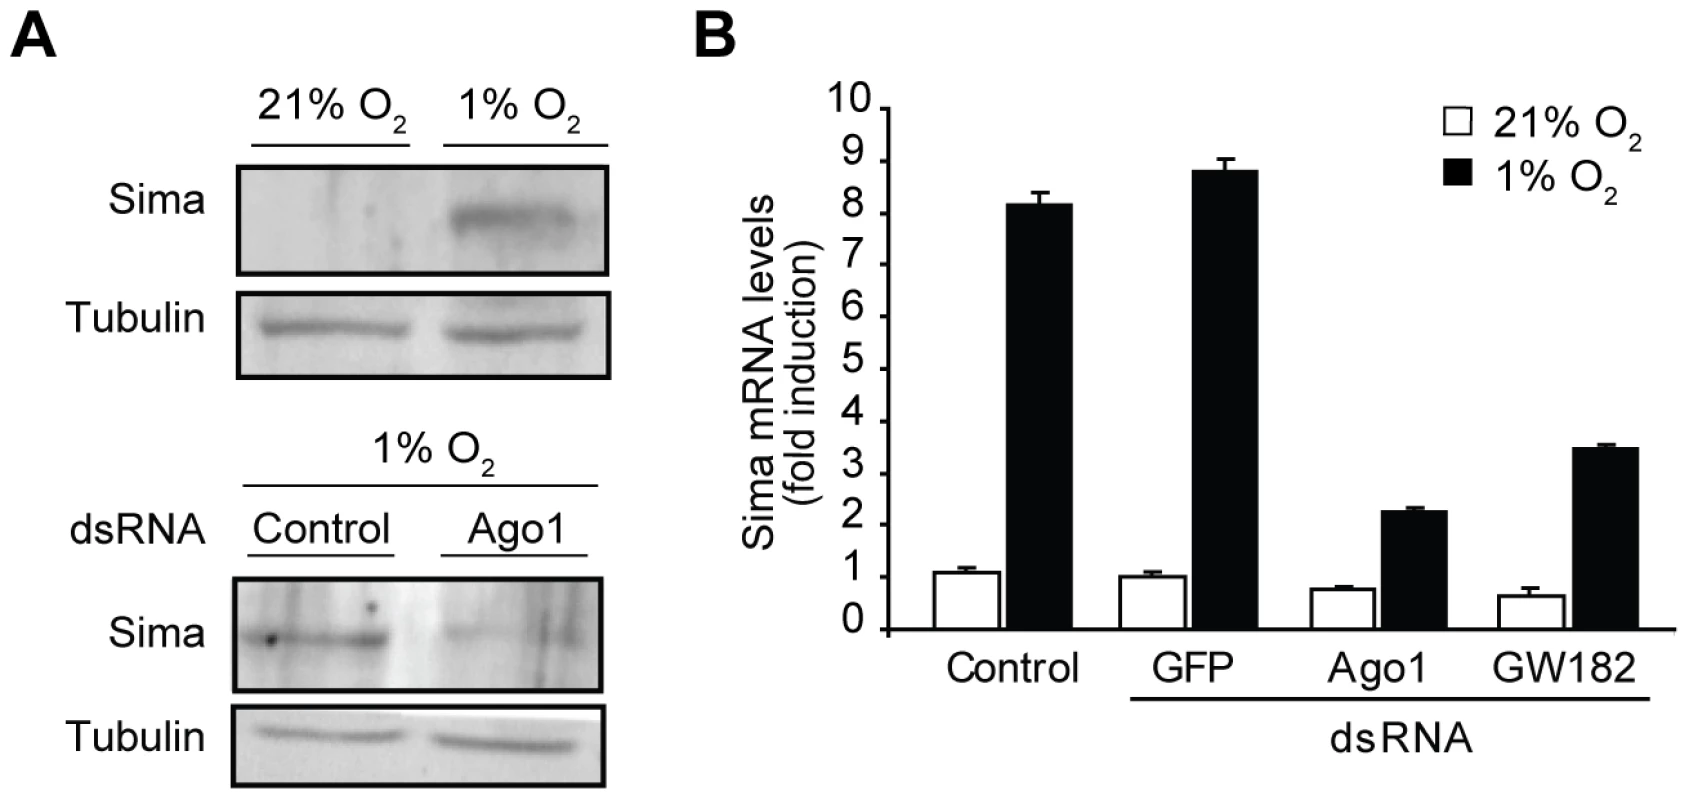 Hypoxic accumulation of Sima protein and mRNA is prevented in cells treated with <i>ago1</i> dsRNA.